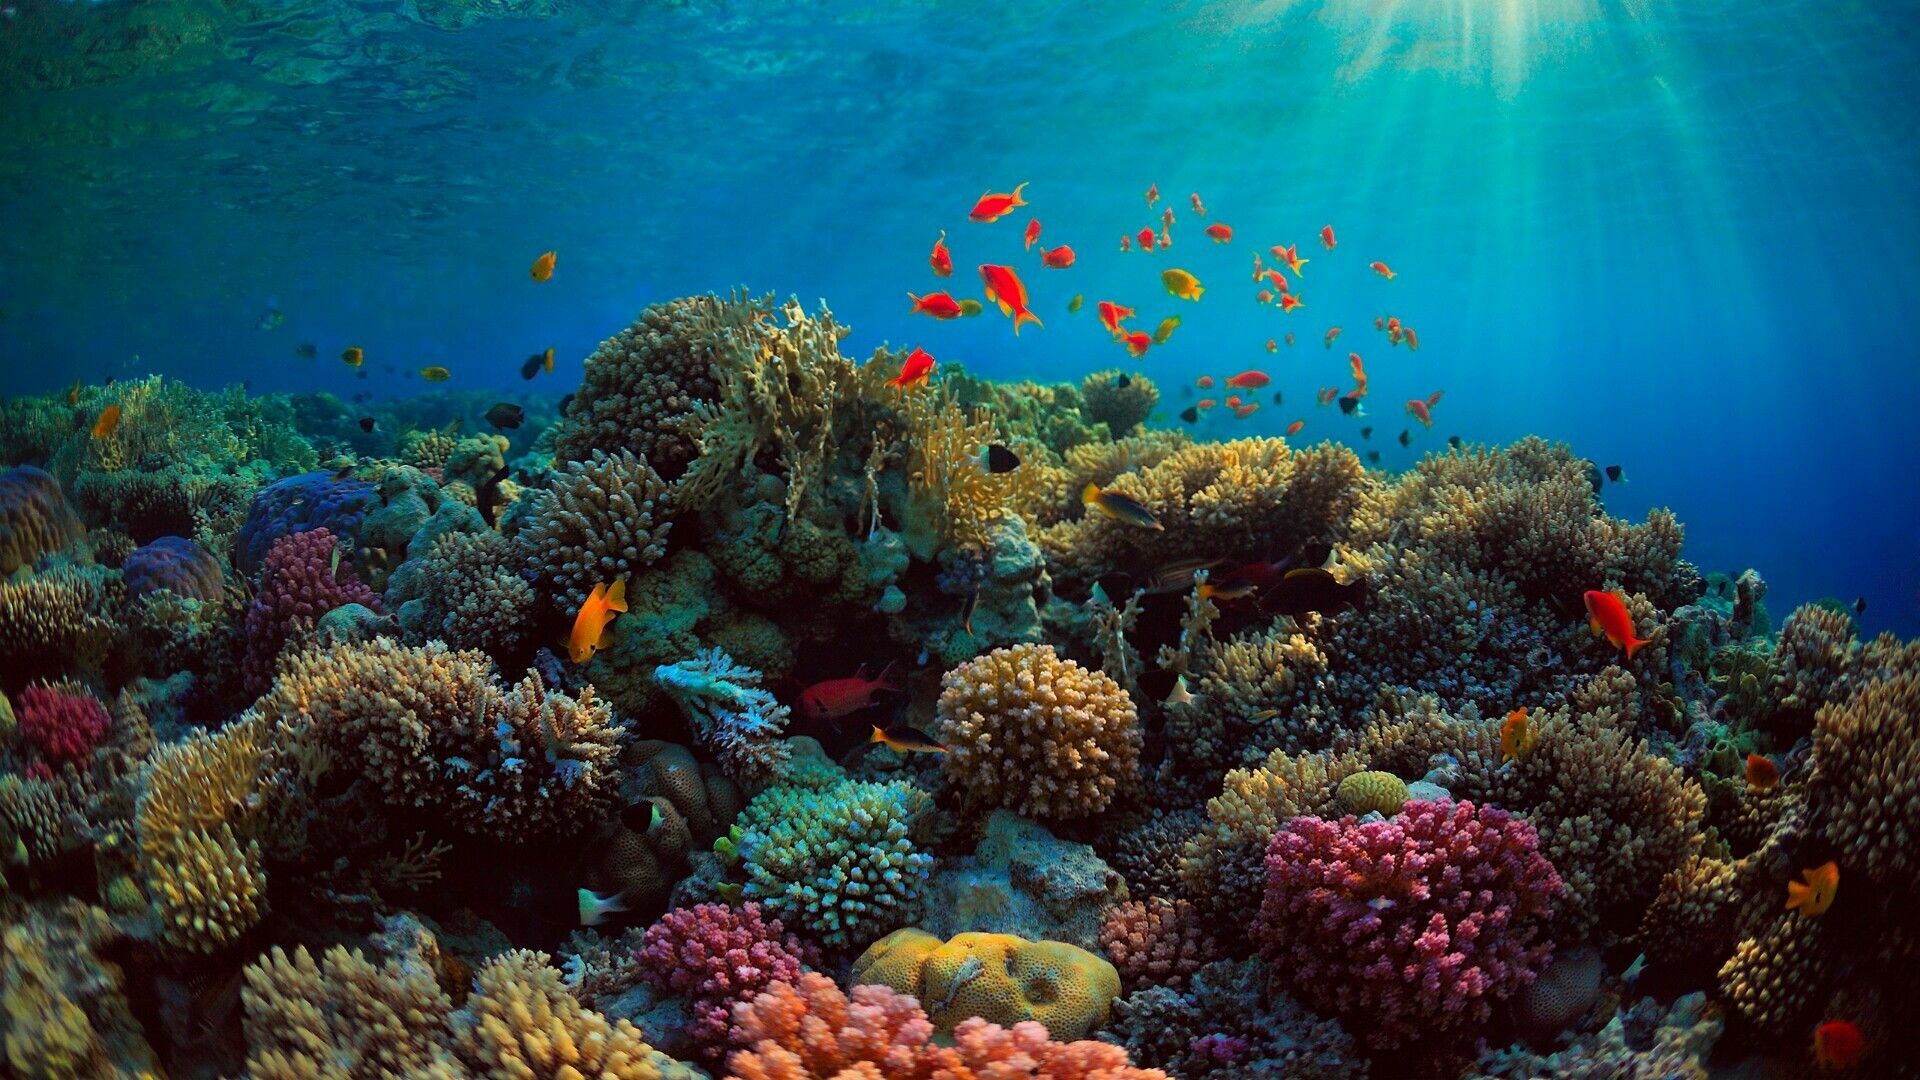 Great Barrier Reef: GBR, Supports an extraordinary diversity of life, including many vulnerable or endangered species. 1920x1080 Full HD Background.